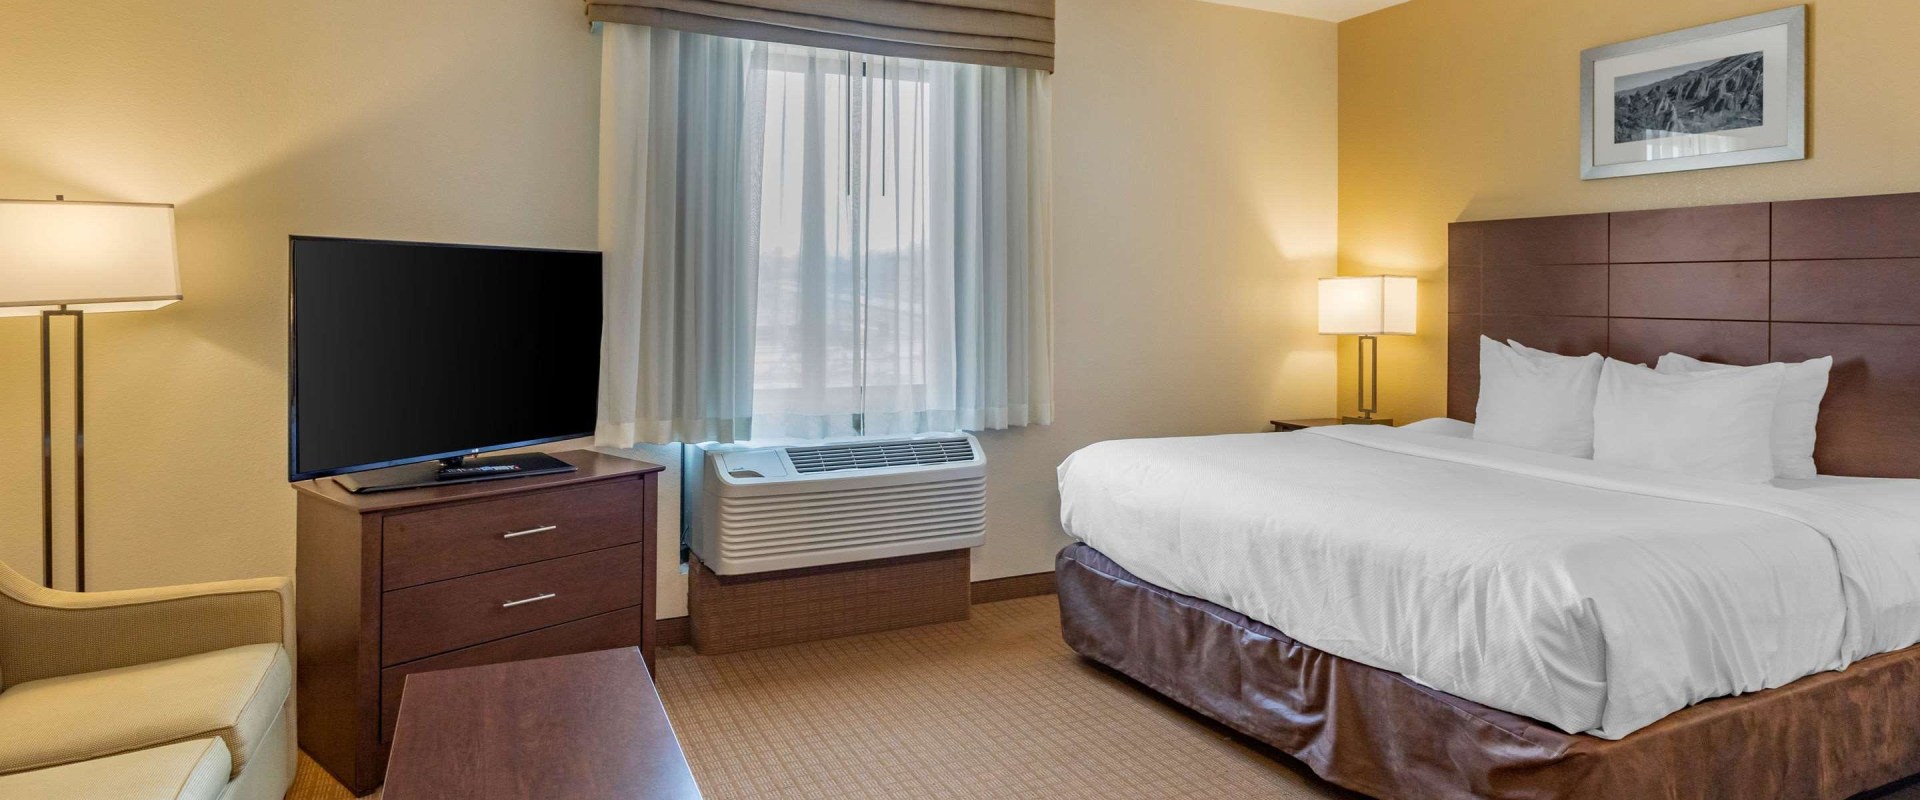 Cancellation Policy for Suites in Denver, Colorado: What You Need to Know